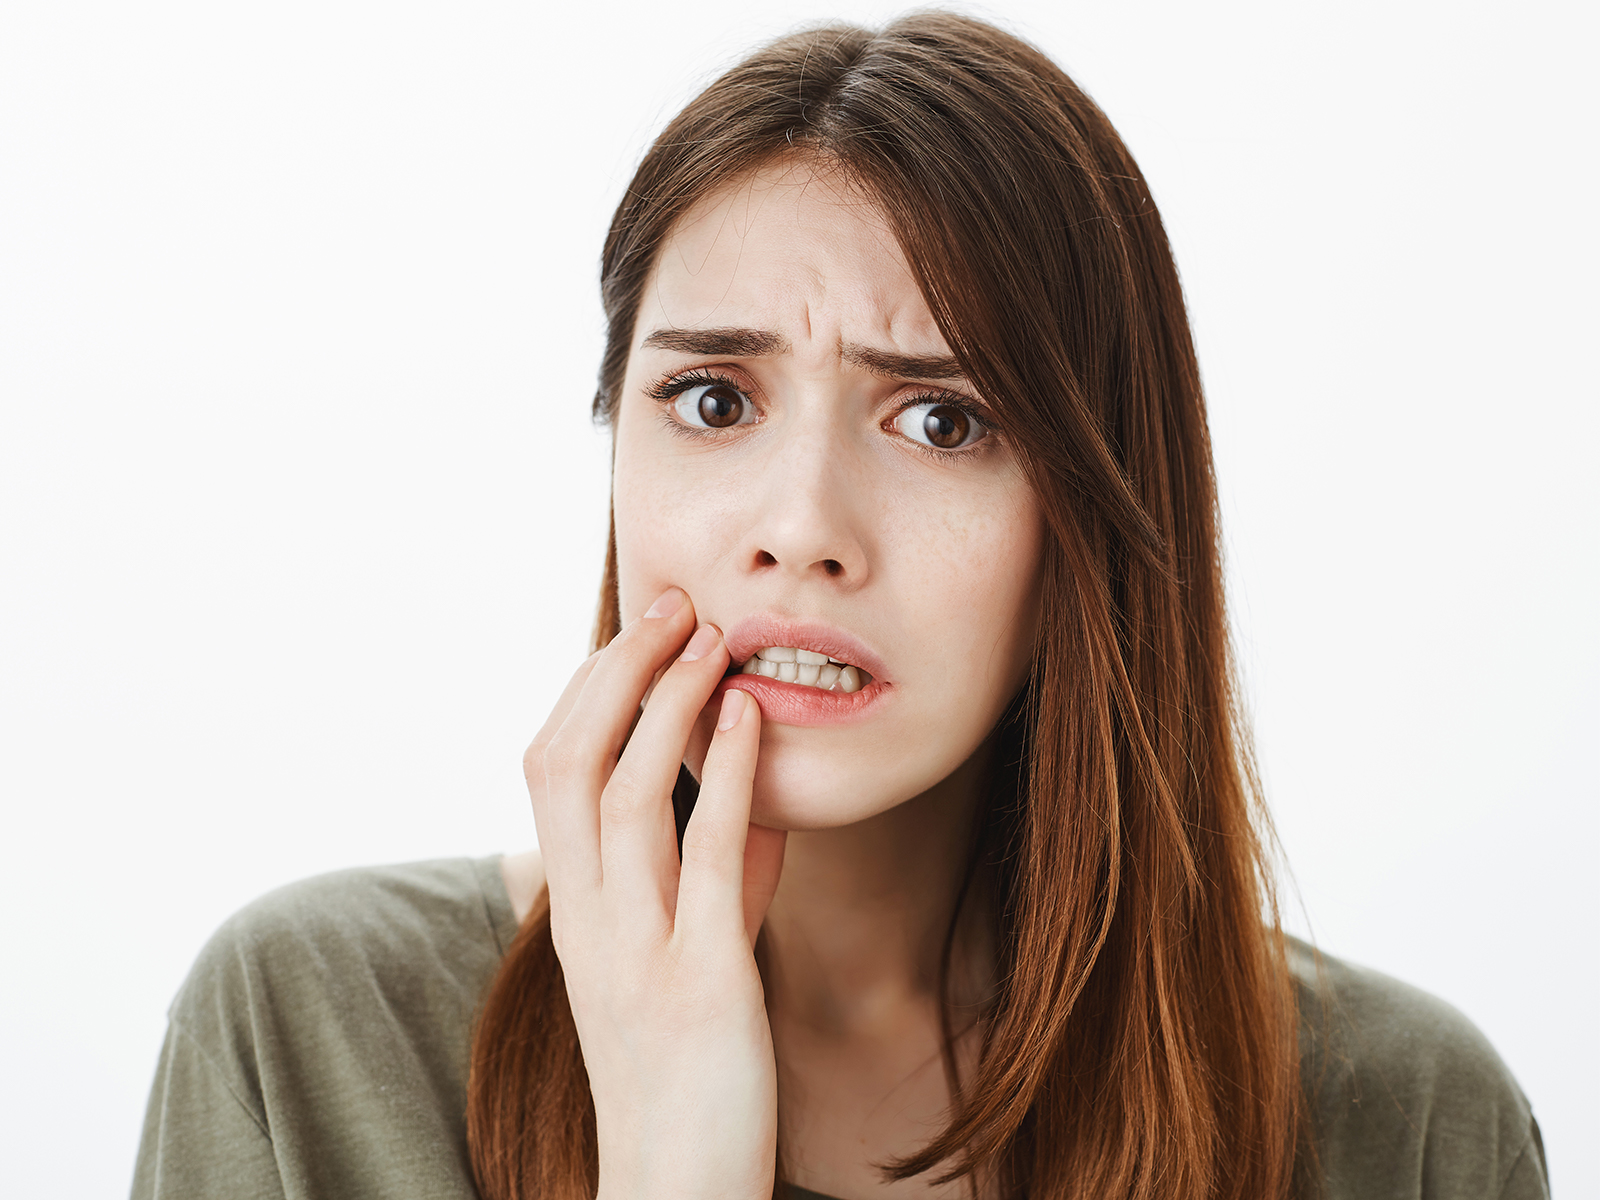 Easy Ways To Reduce Your Dental Anxiety